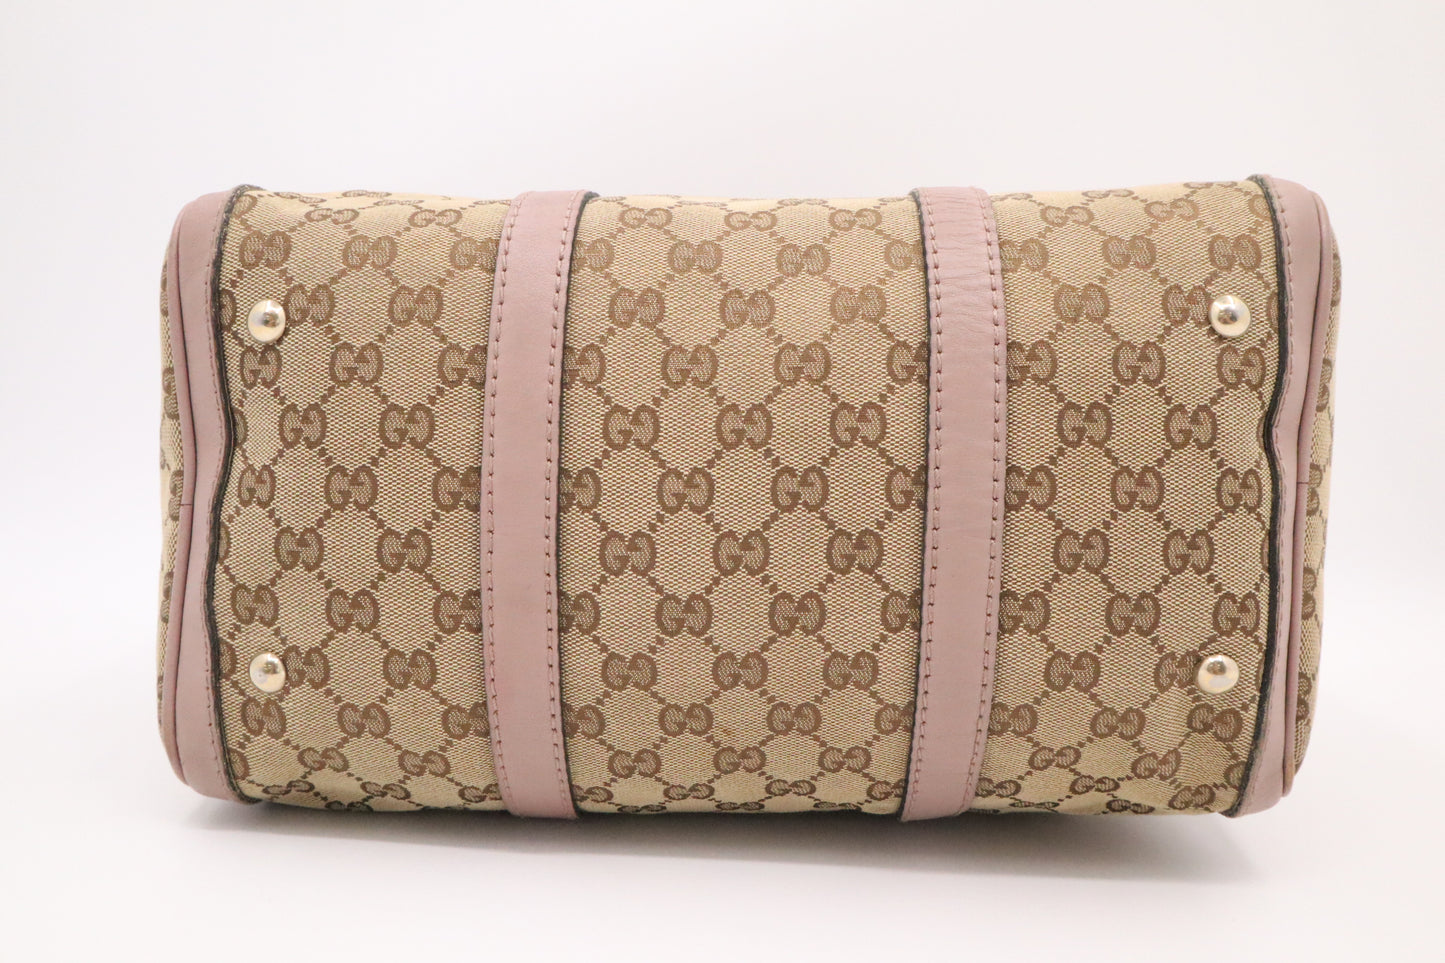 Gucci Boston Bag in GG Canvas and Pink Leather